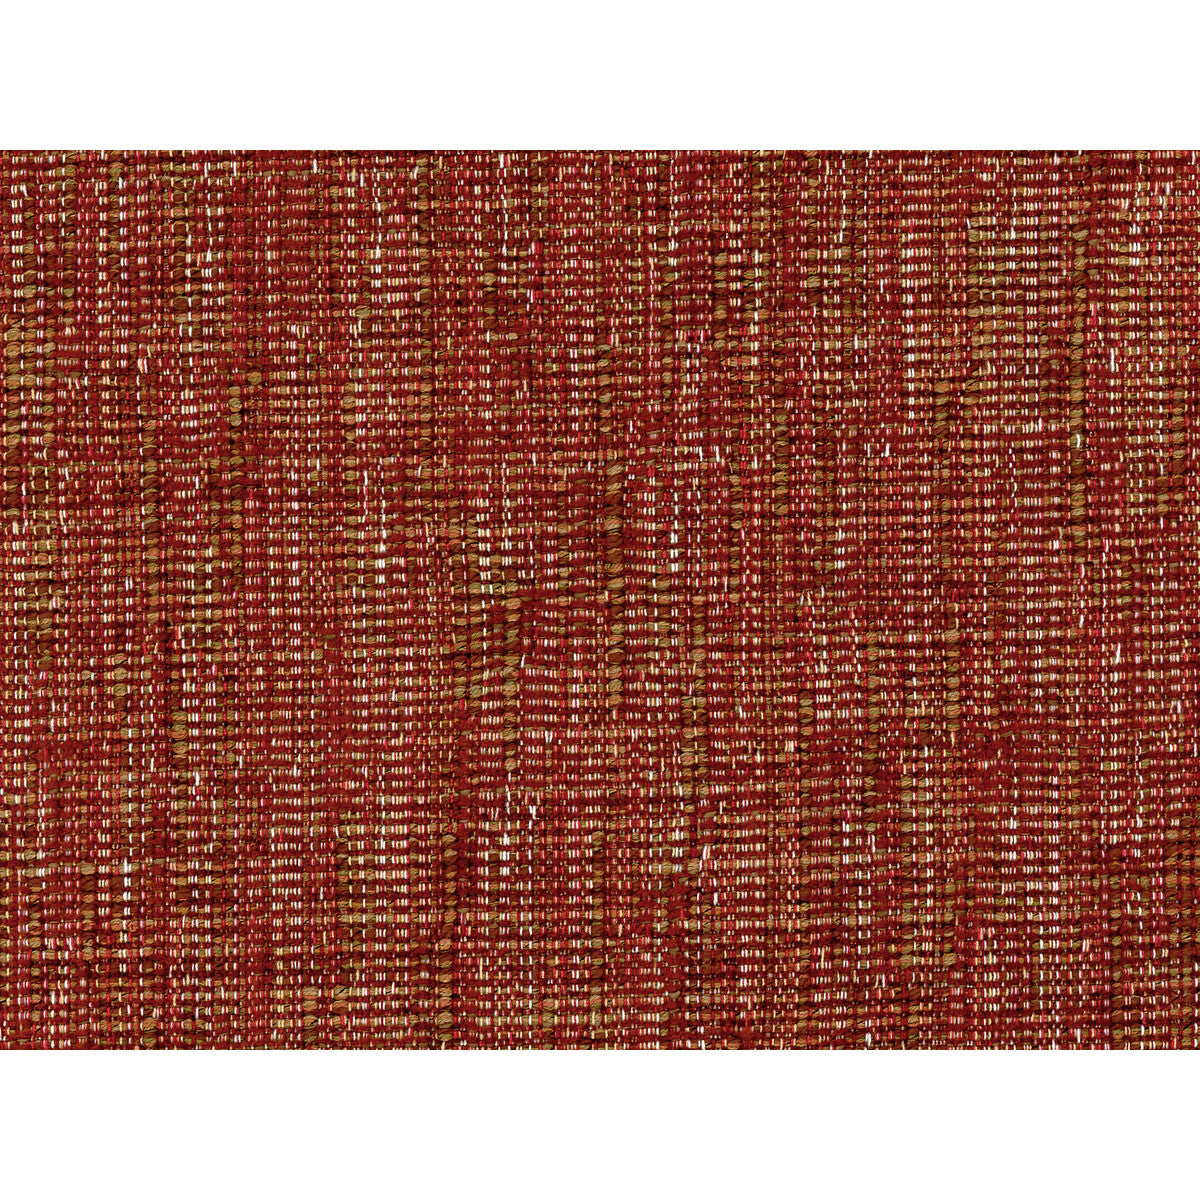 Morecambe Bay fabric in cinnabar color - pattern 2016124.196.0 - by Lee Jofa in the Furness Weaves collection